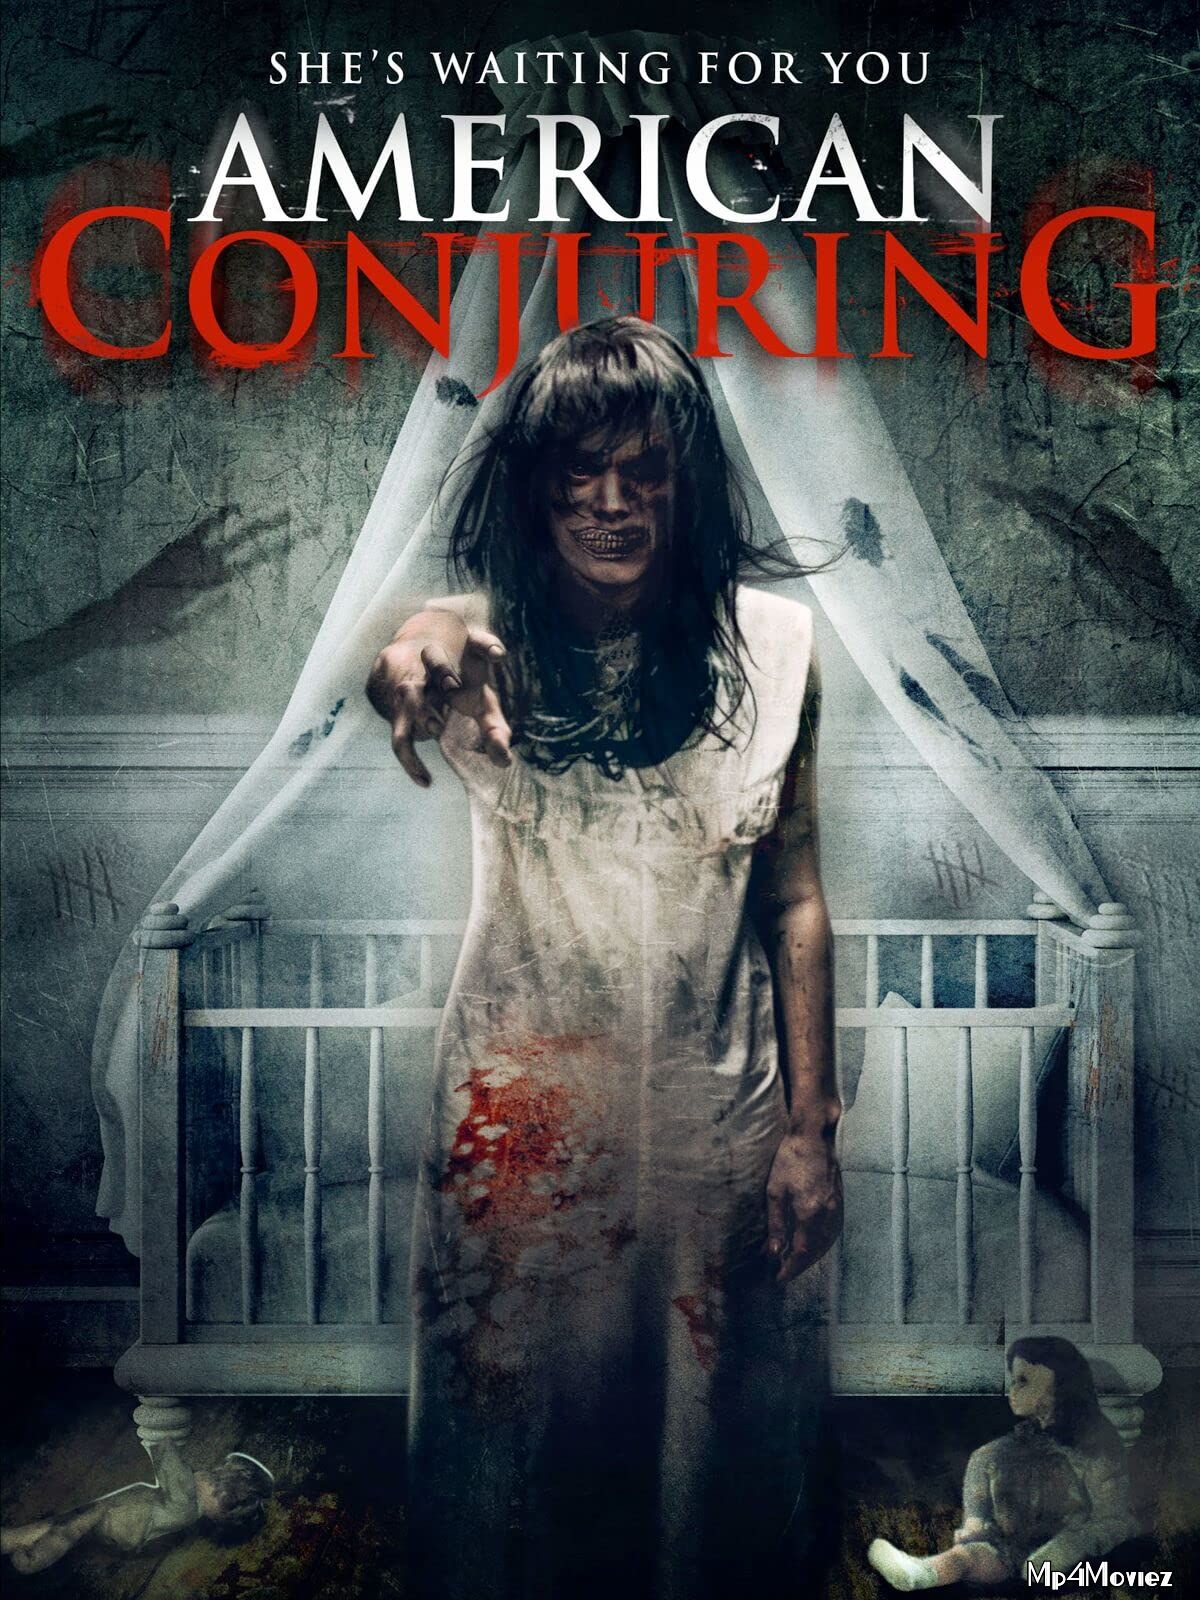 American Conjuring (2016) Hindi Dubbed BluRay download full movie